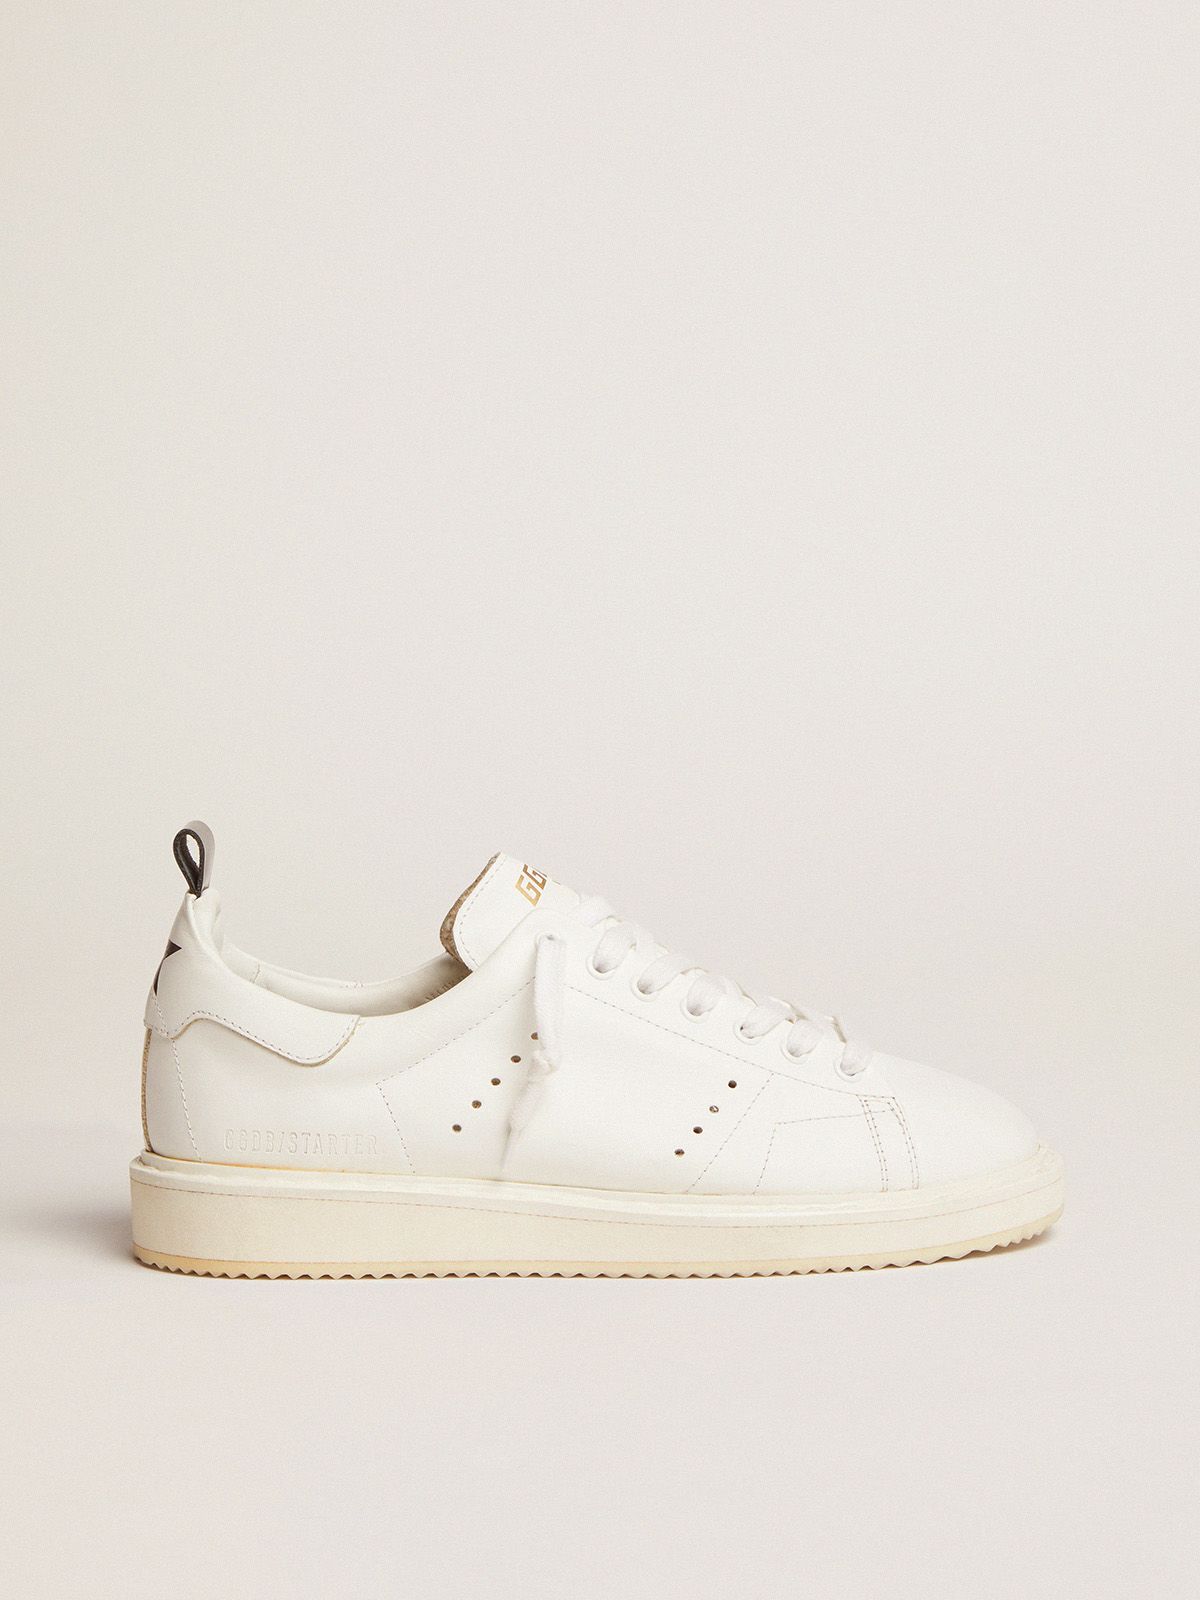 golden goose white Starter in sneakers total leather